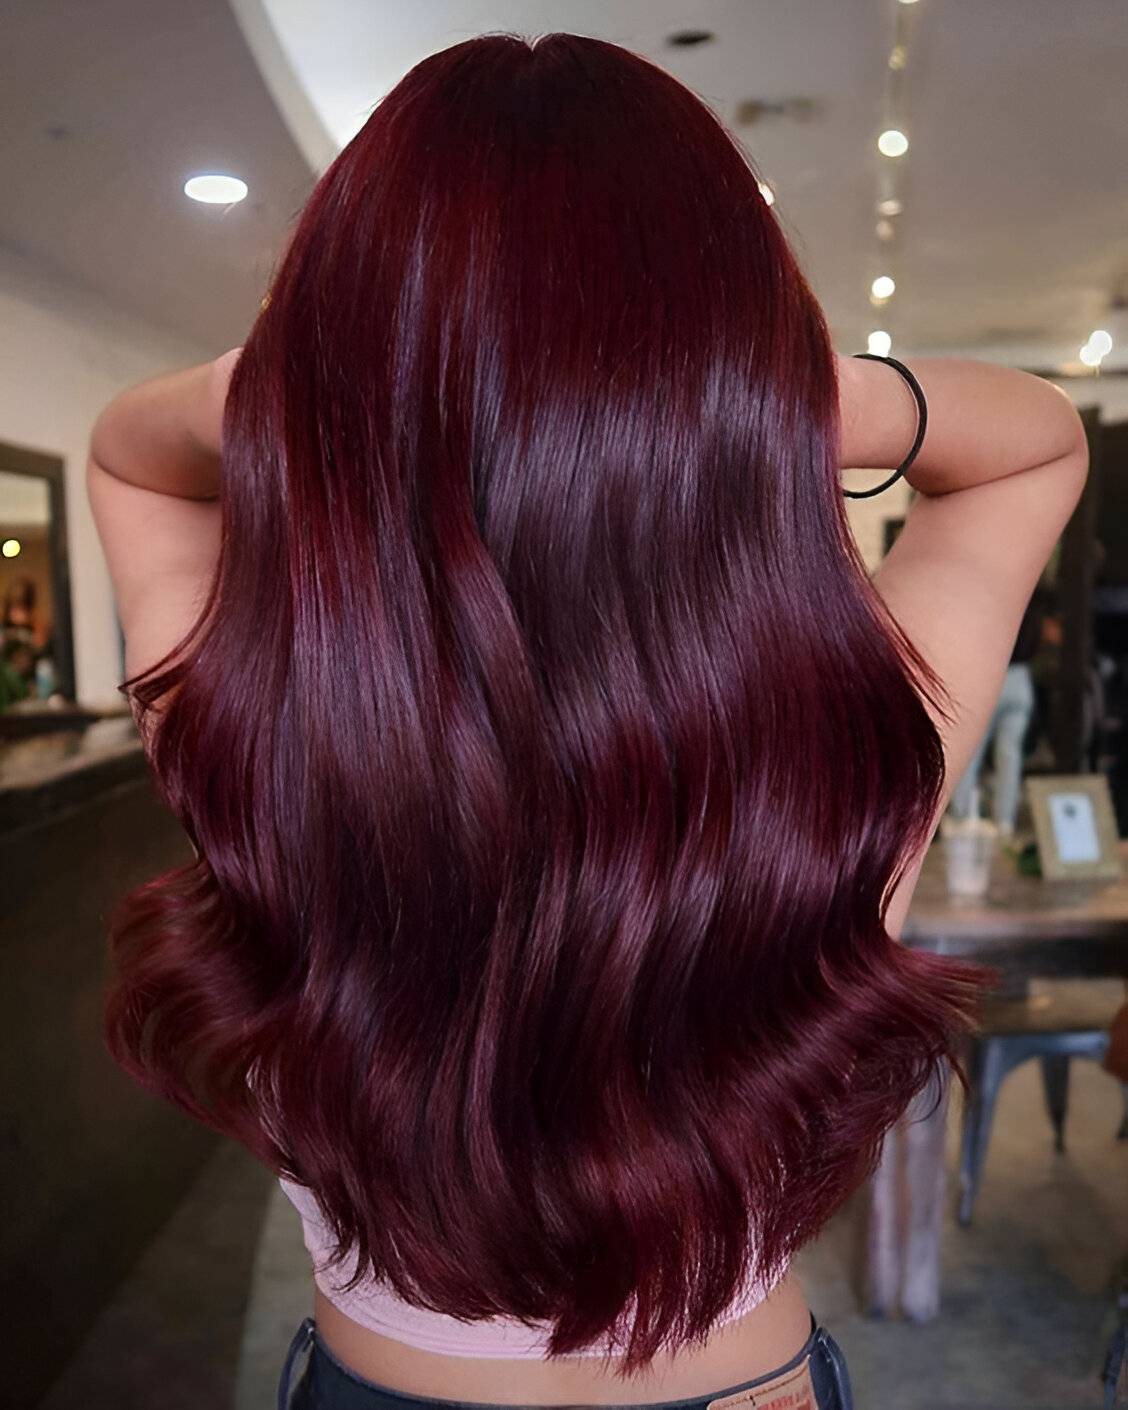 27 Hottest Red Hair Color Ideas Perfect For This Season 23